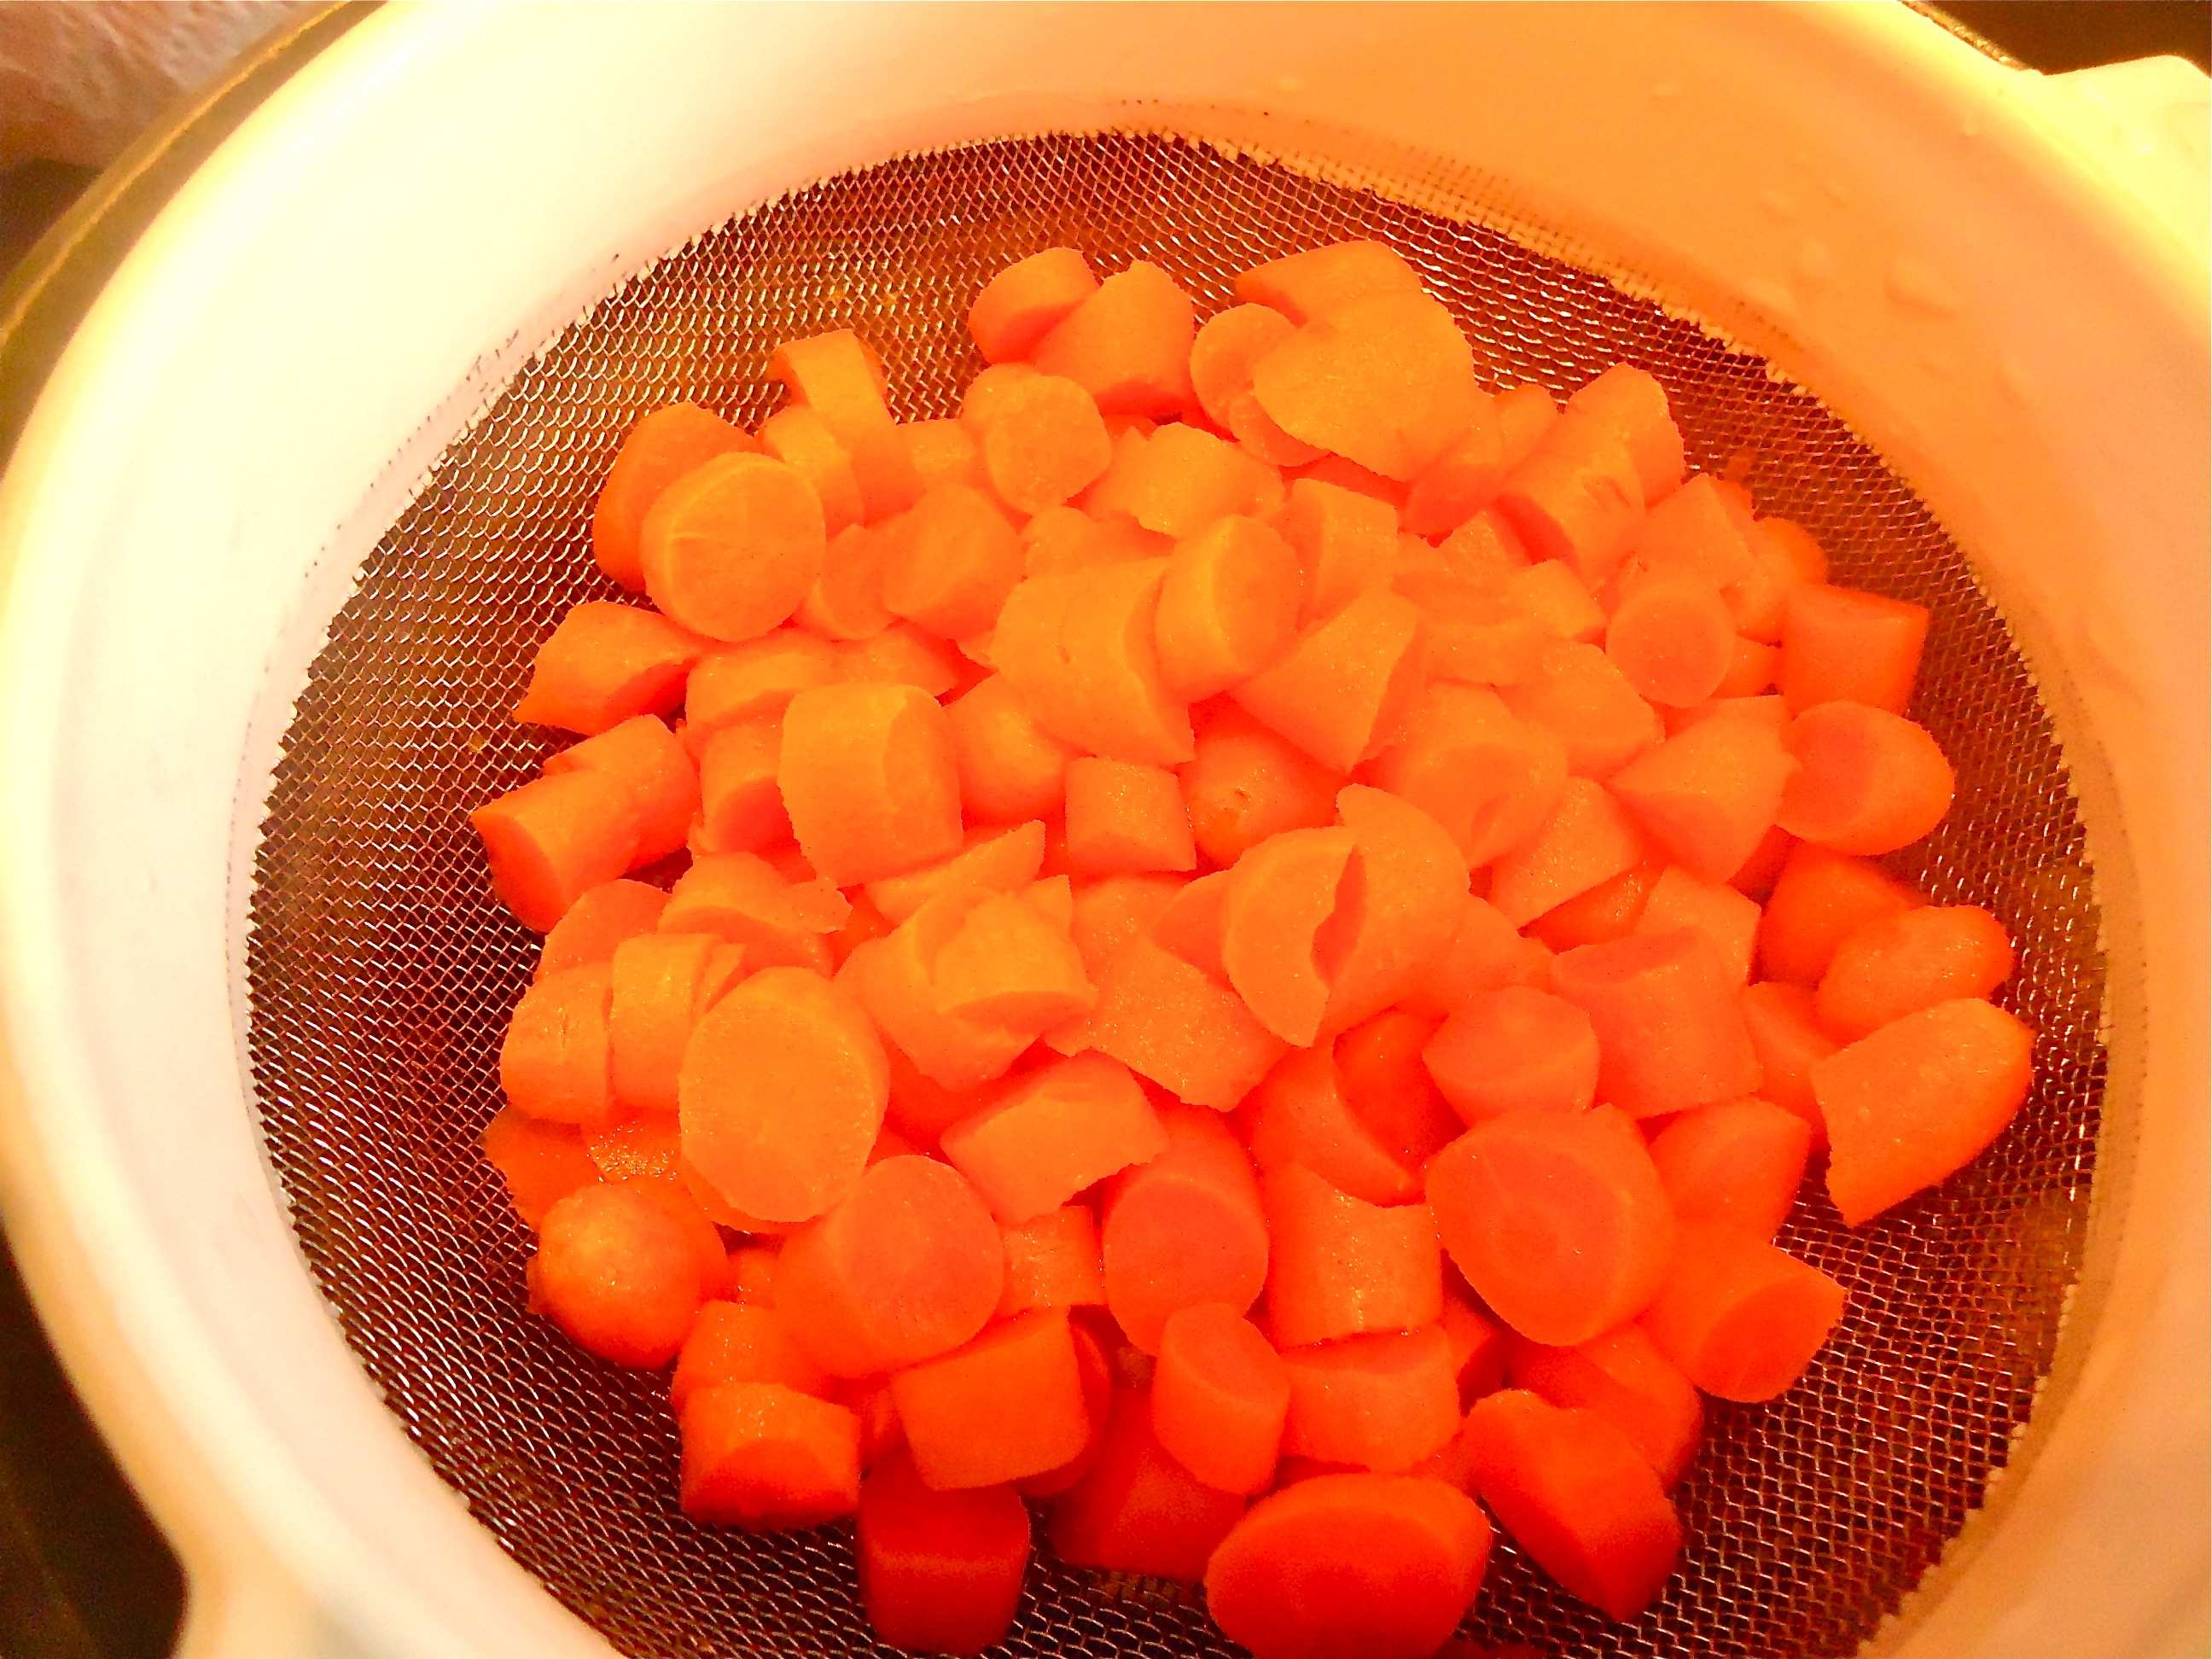 Par boil (or blanche) the carrots for 2 minutes, drain and allow to ...